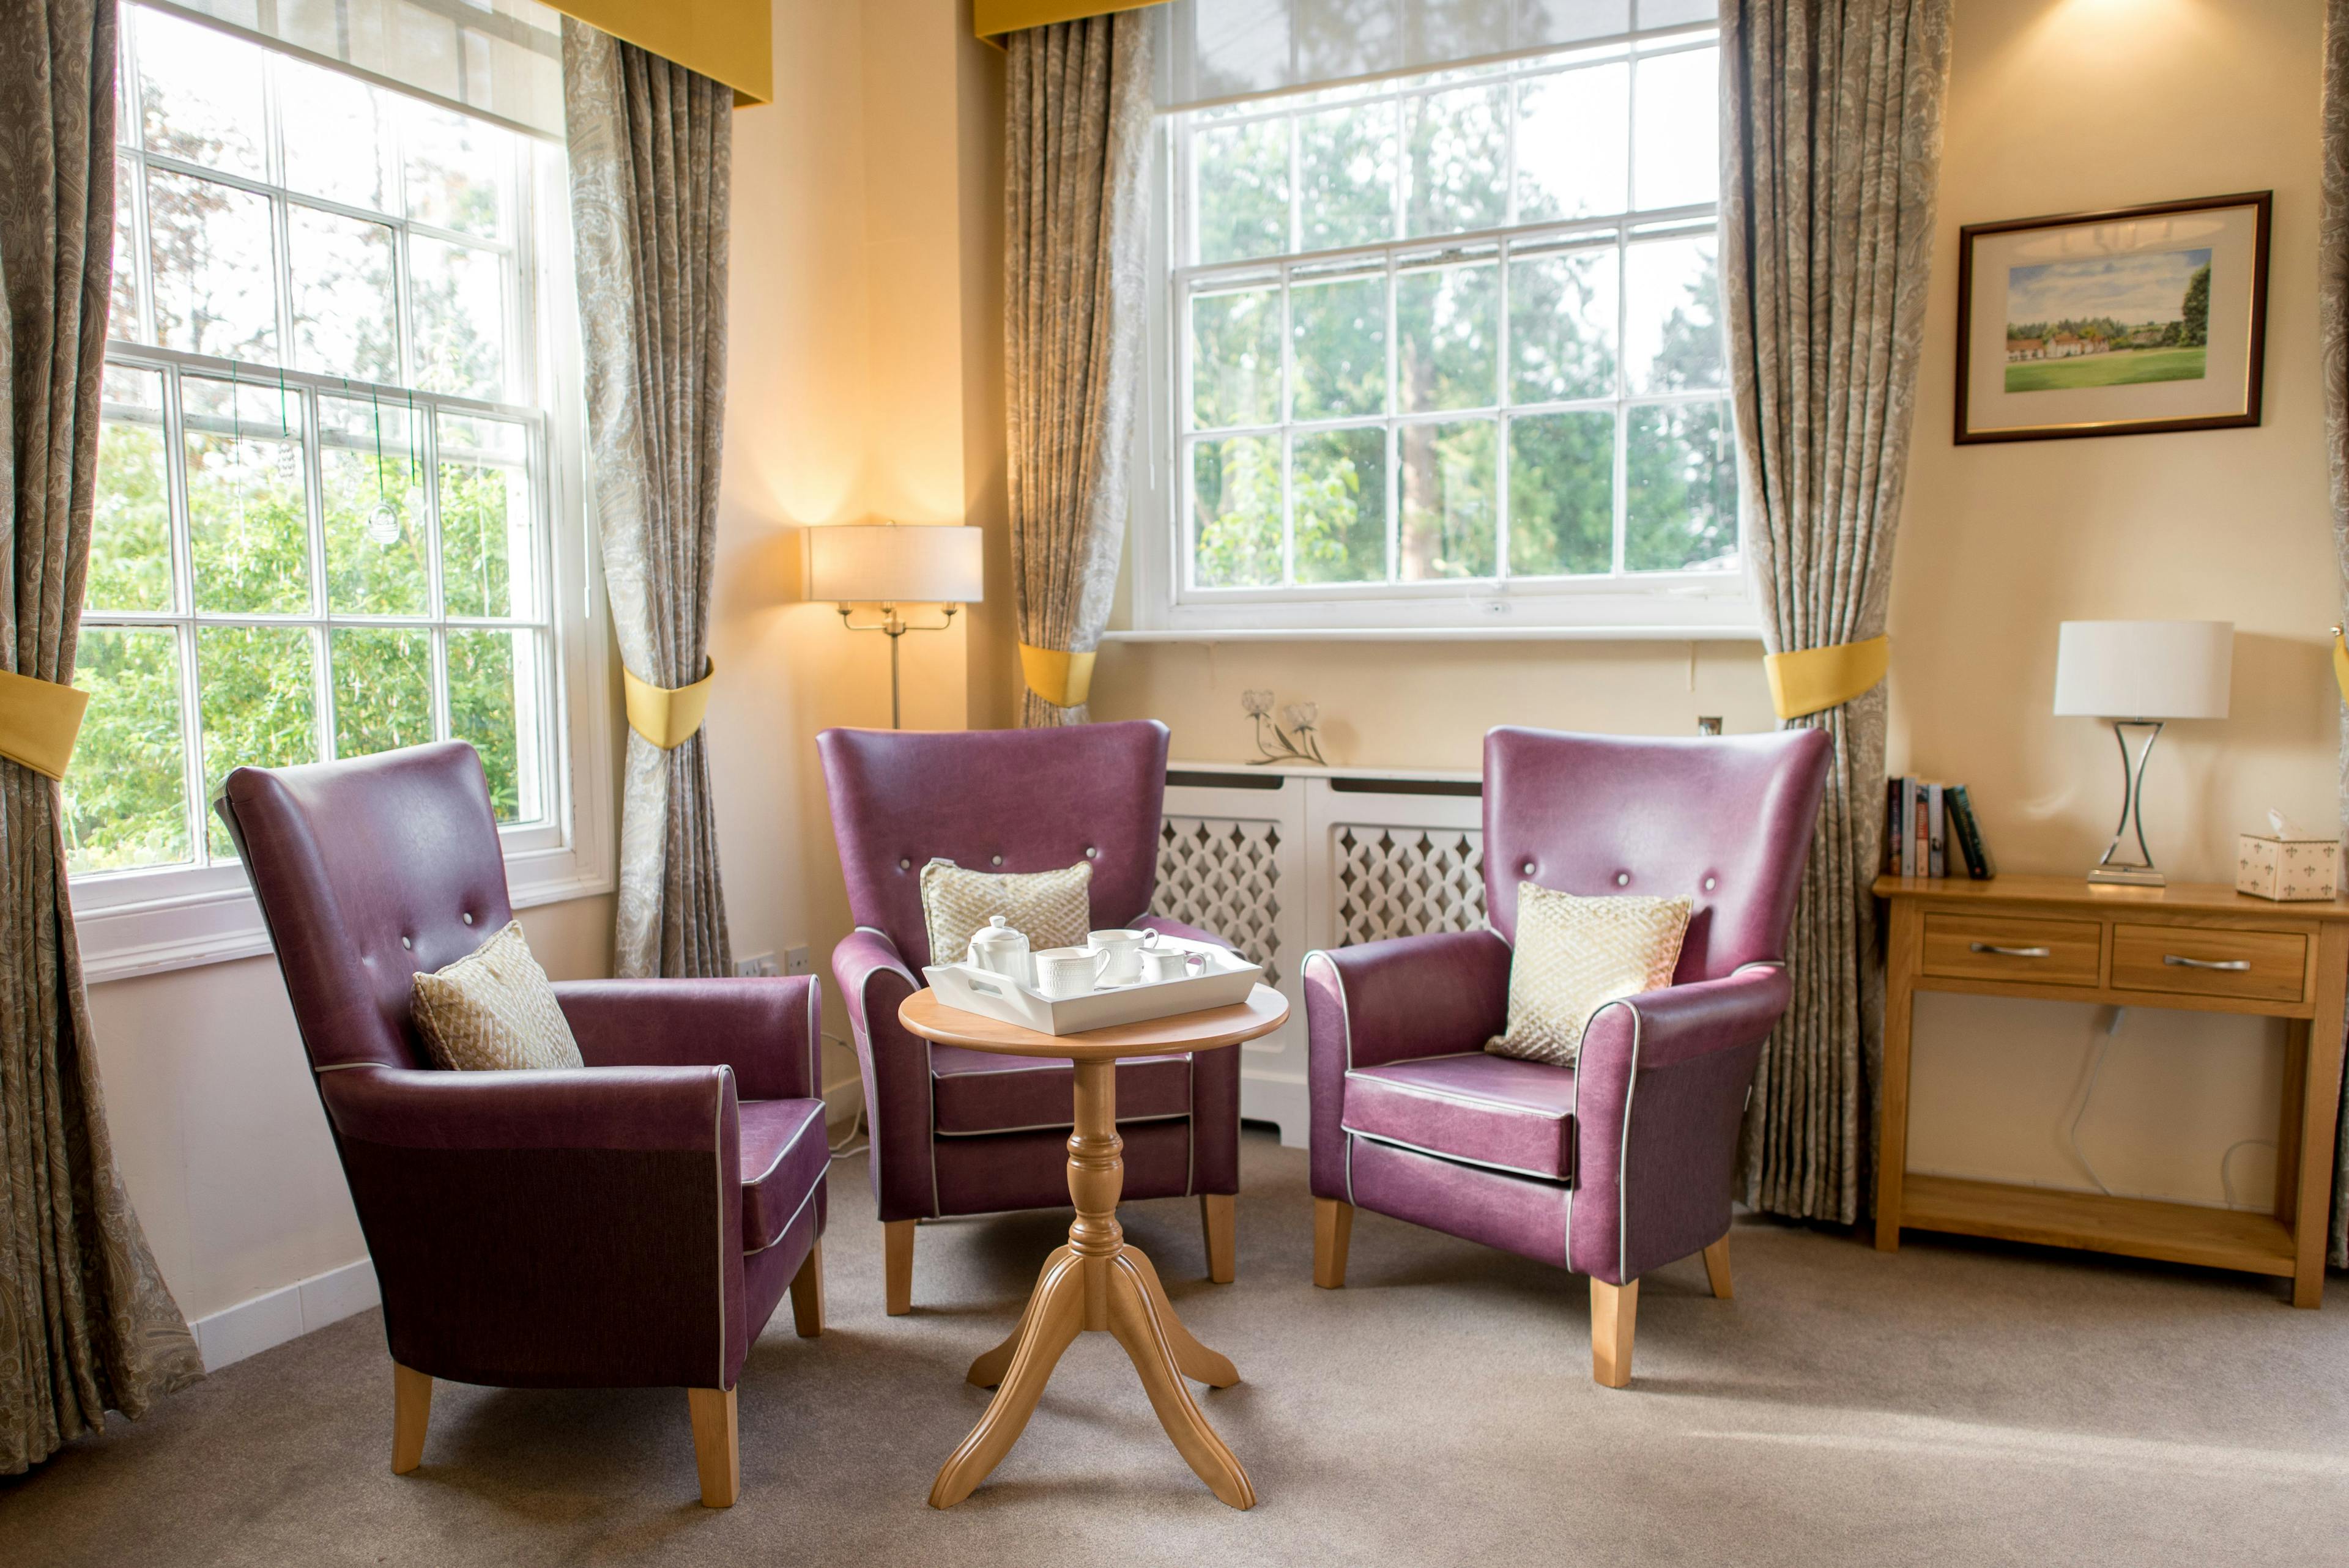 Lounge of Halstead Hall care home in Braintree, Essex